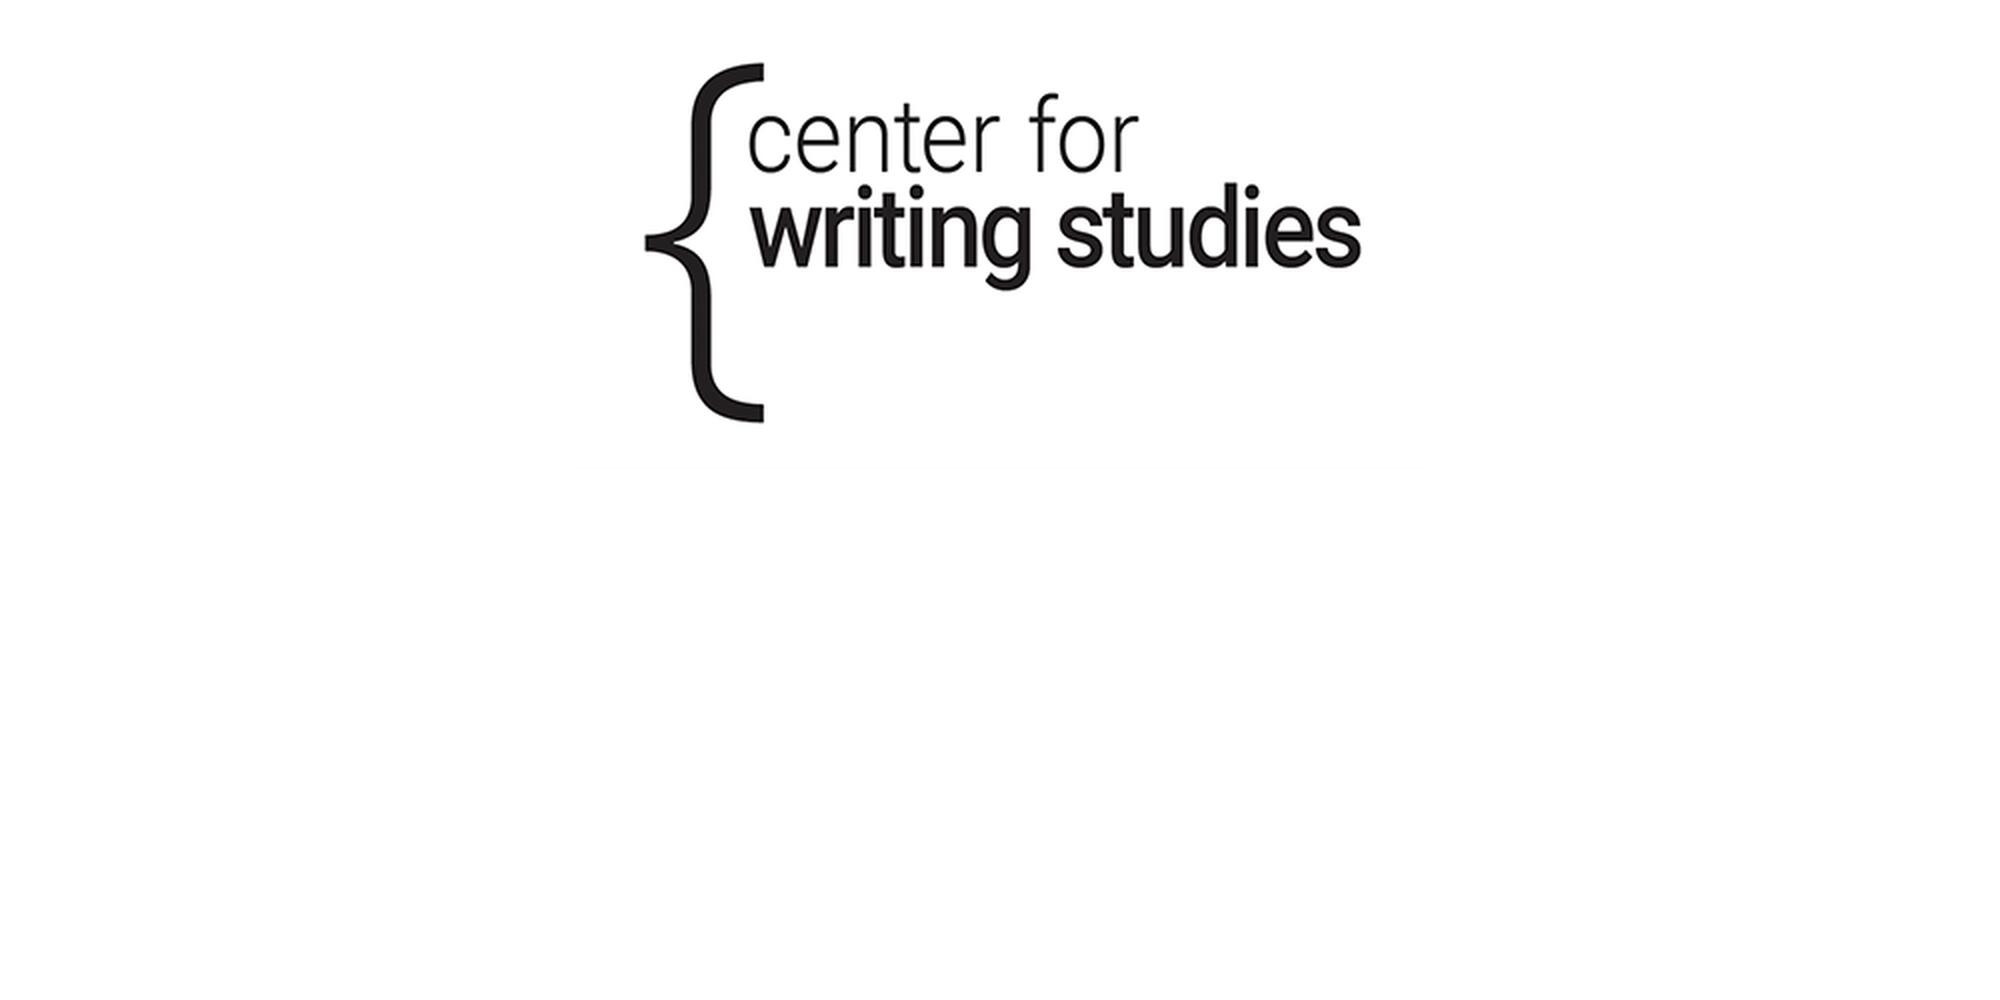 Logo for the Center for Writing Studies. A curly parenthetical brace appears open-right on the left-hand side of the logo. The text "Center for Writing Studies" appears nestled within the brace in lowercase type. "Writing Studies" is bolded.